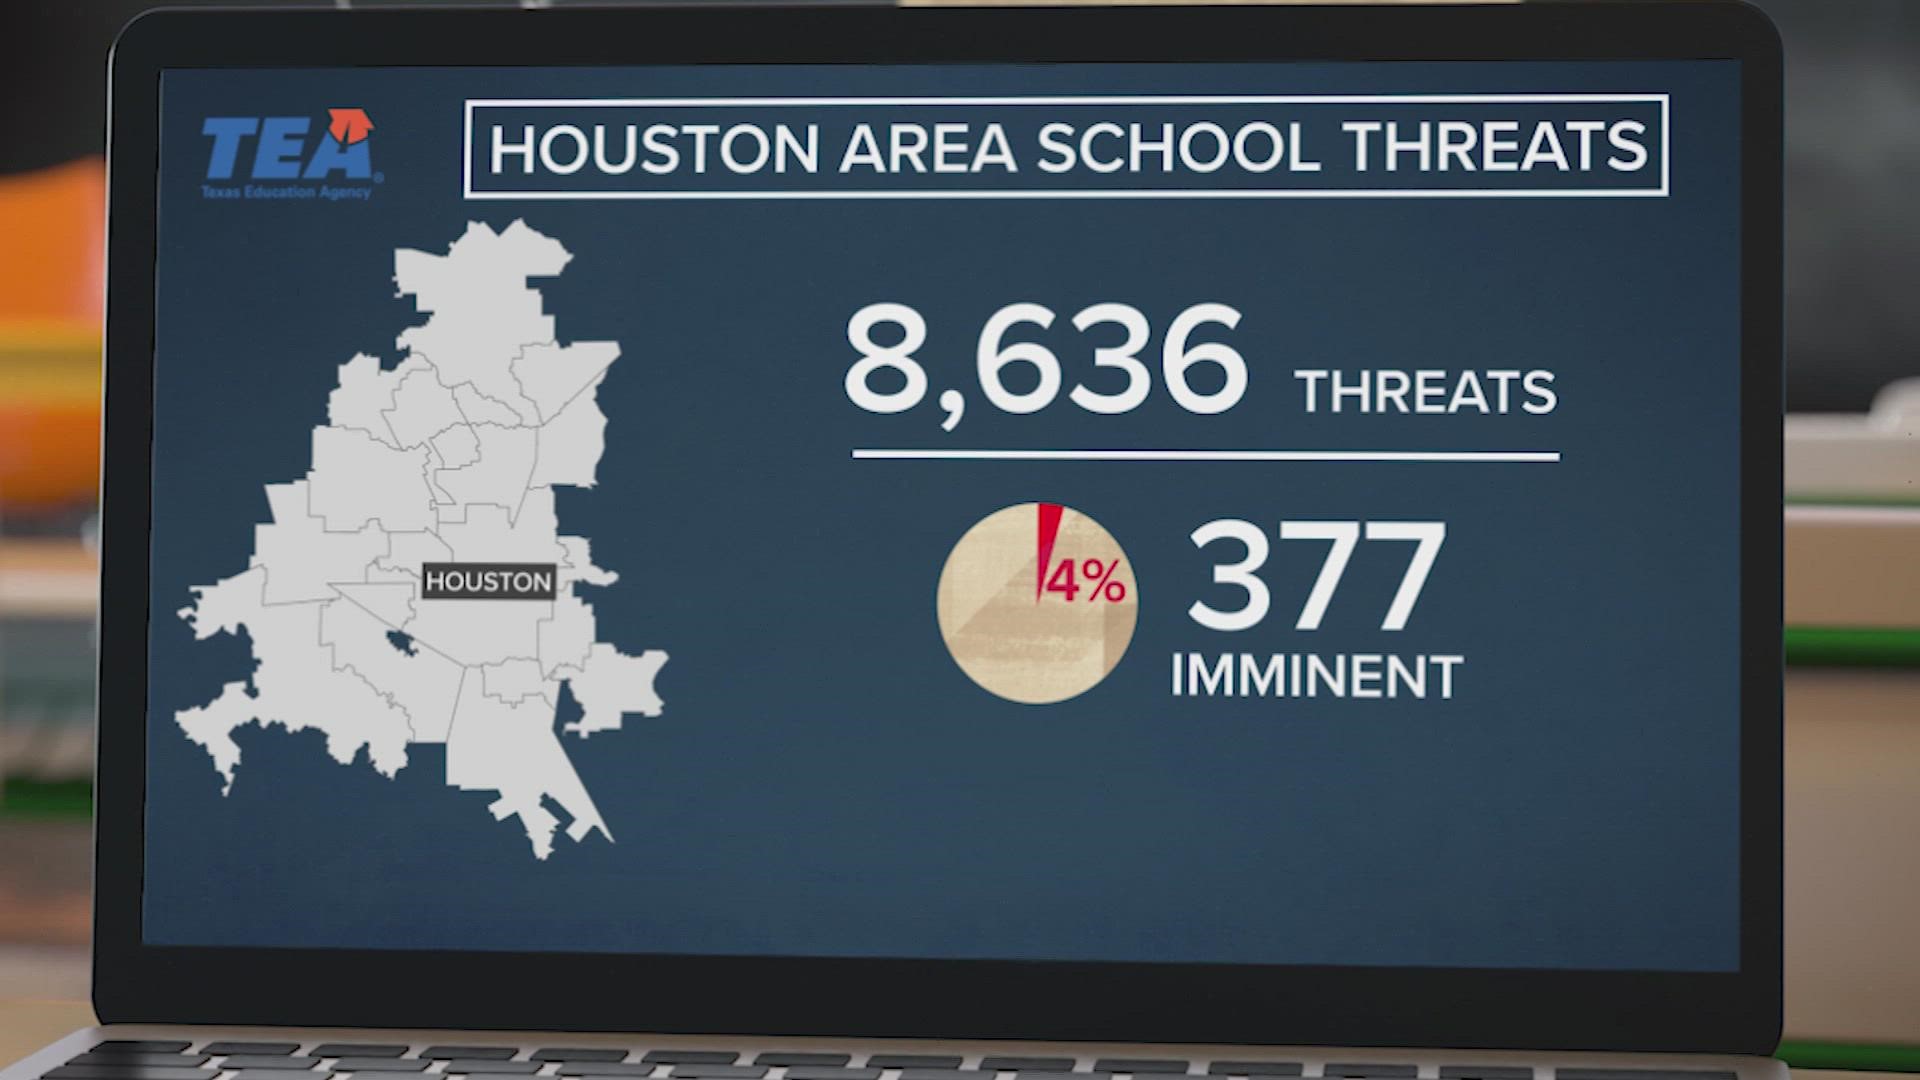 In Greater Houston, 8,636 threat reports were reviewed last year. Only about 24% were considered viable and 4% of all the threats were reported to law enforcement.